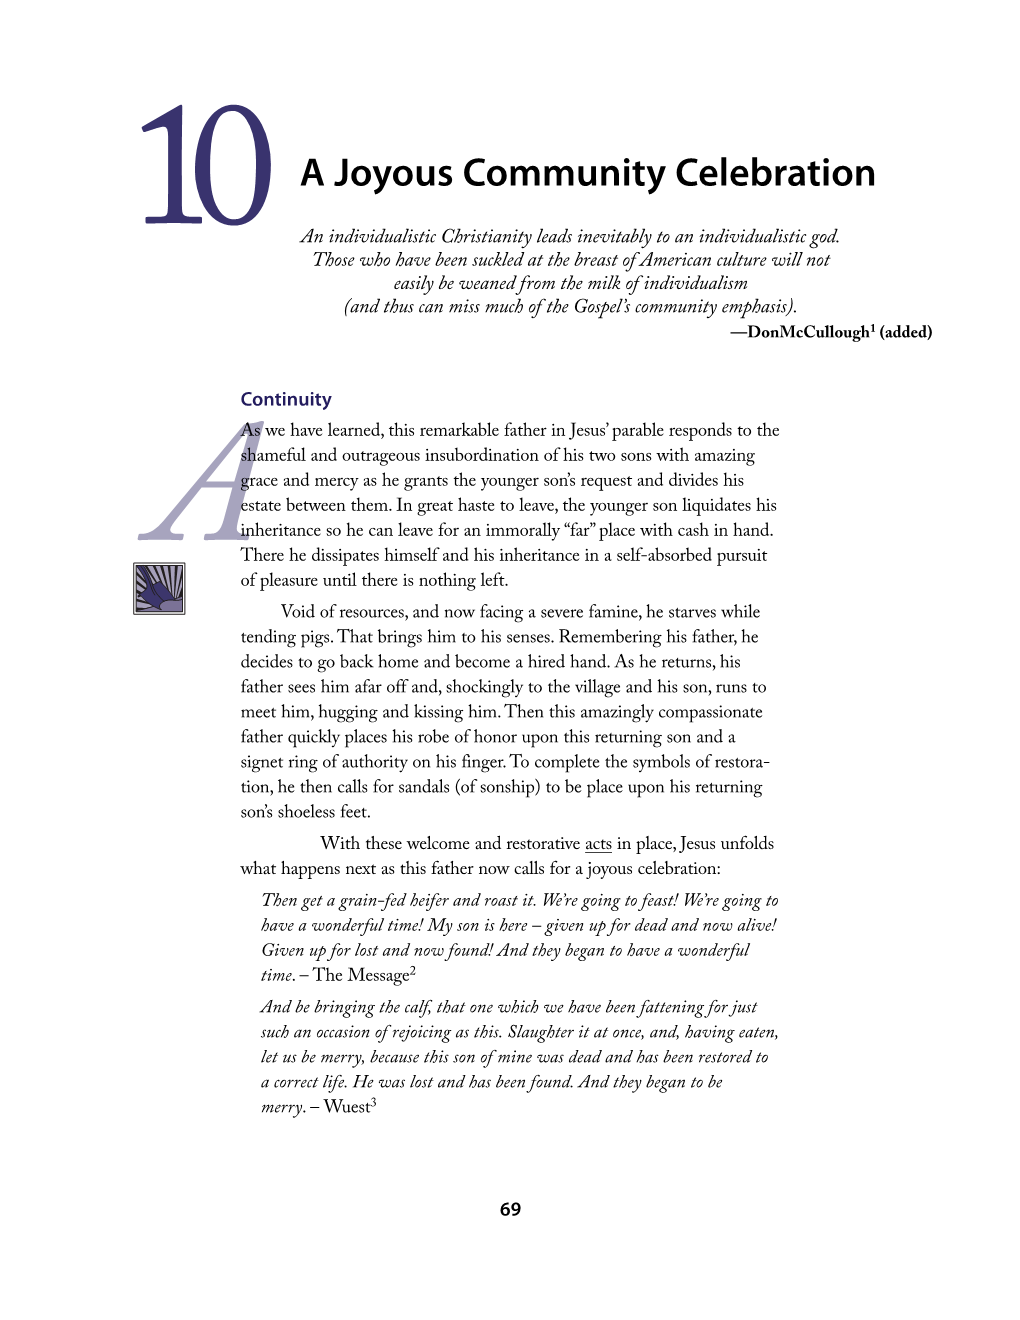 A Joyous Community Celebration 10 an Individualistic Christianity Leads Inevitably to an Individualistic God